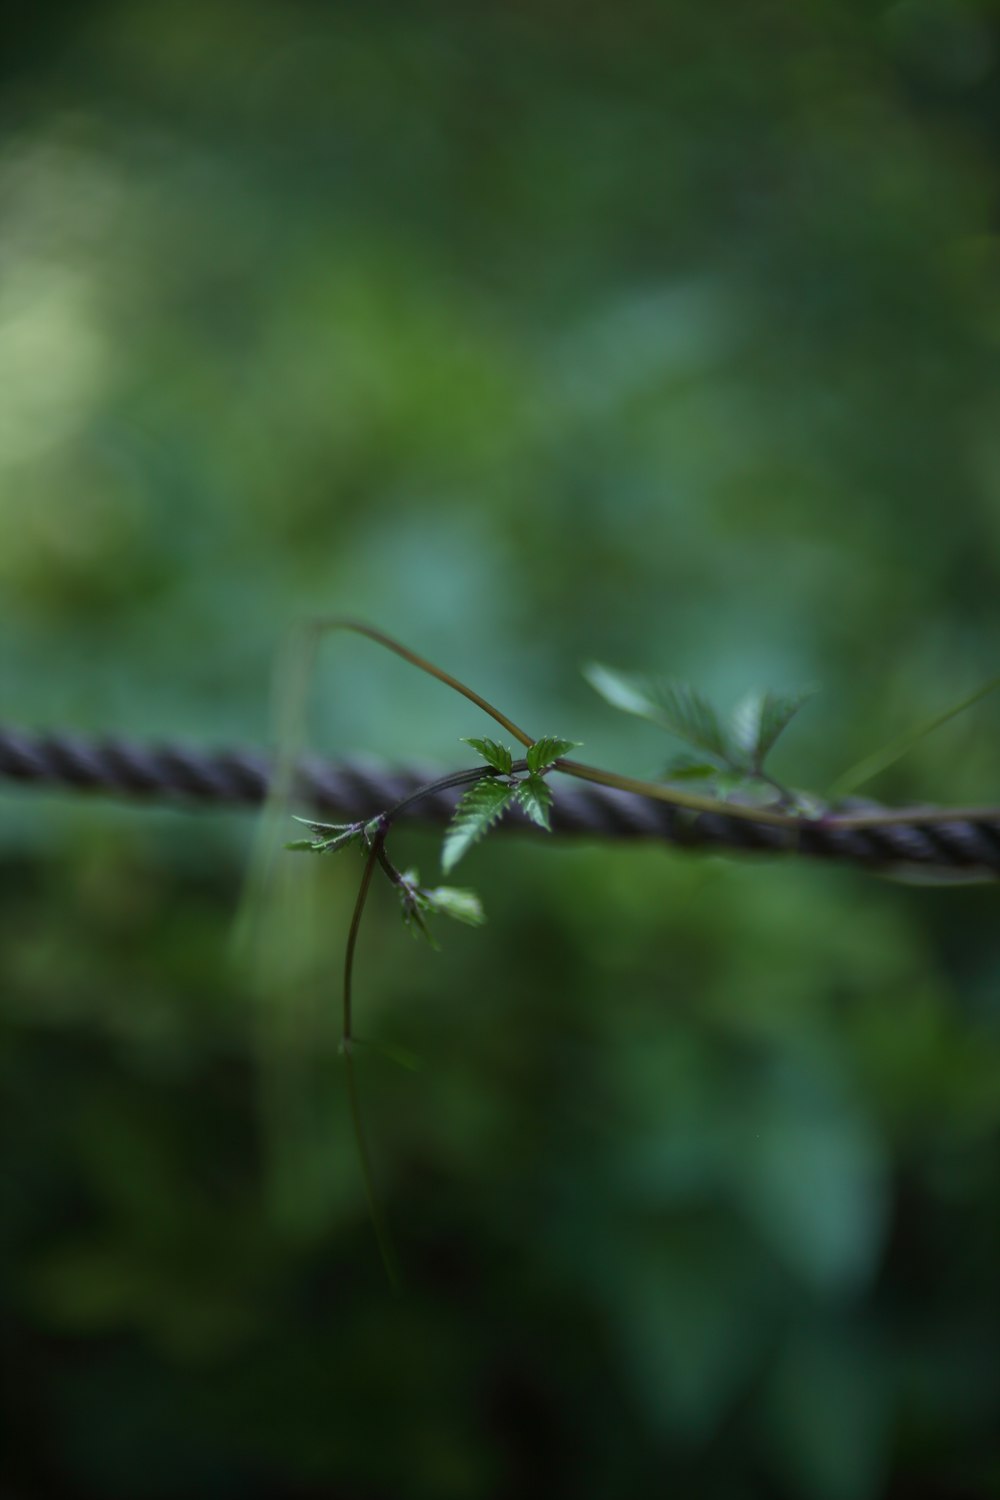 a close up of a wire with a plant on it